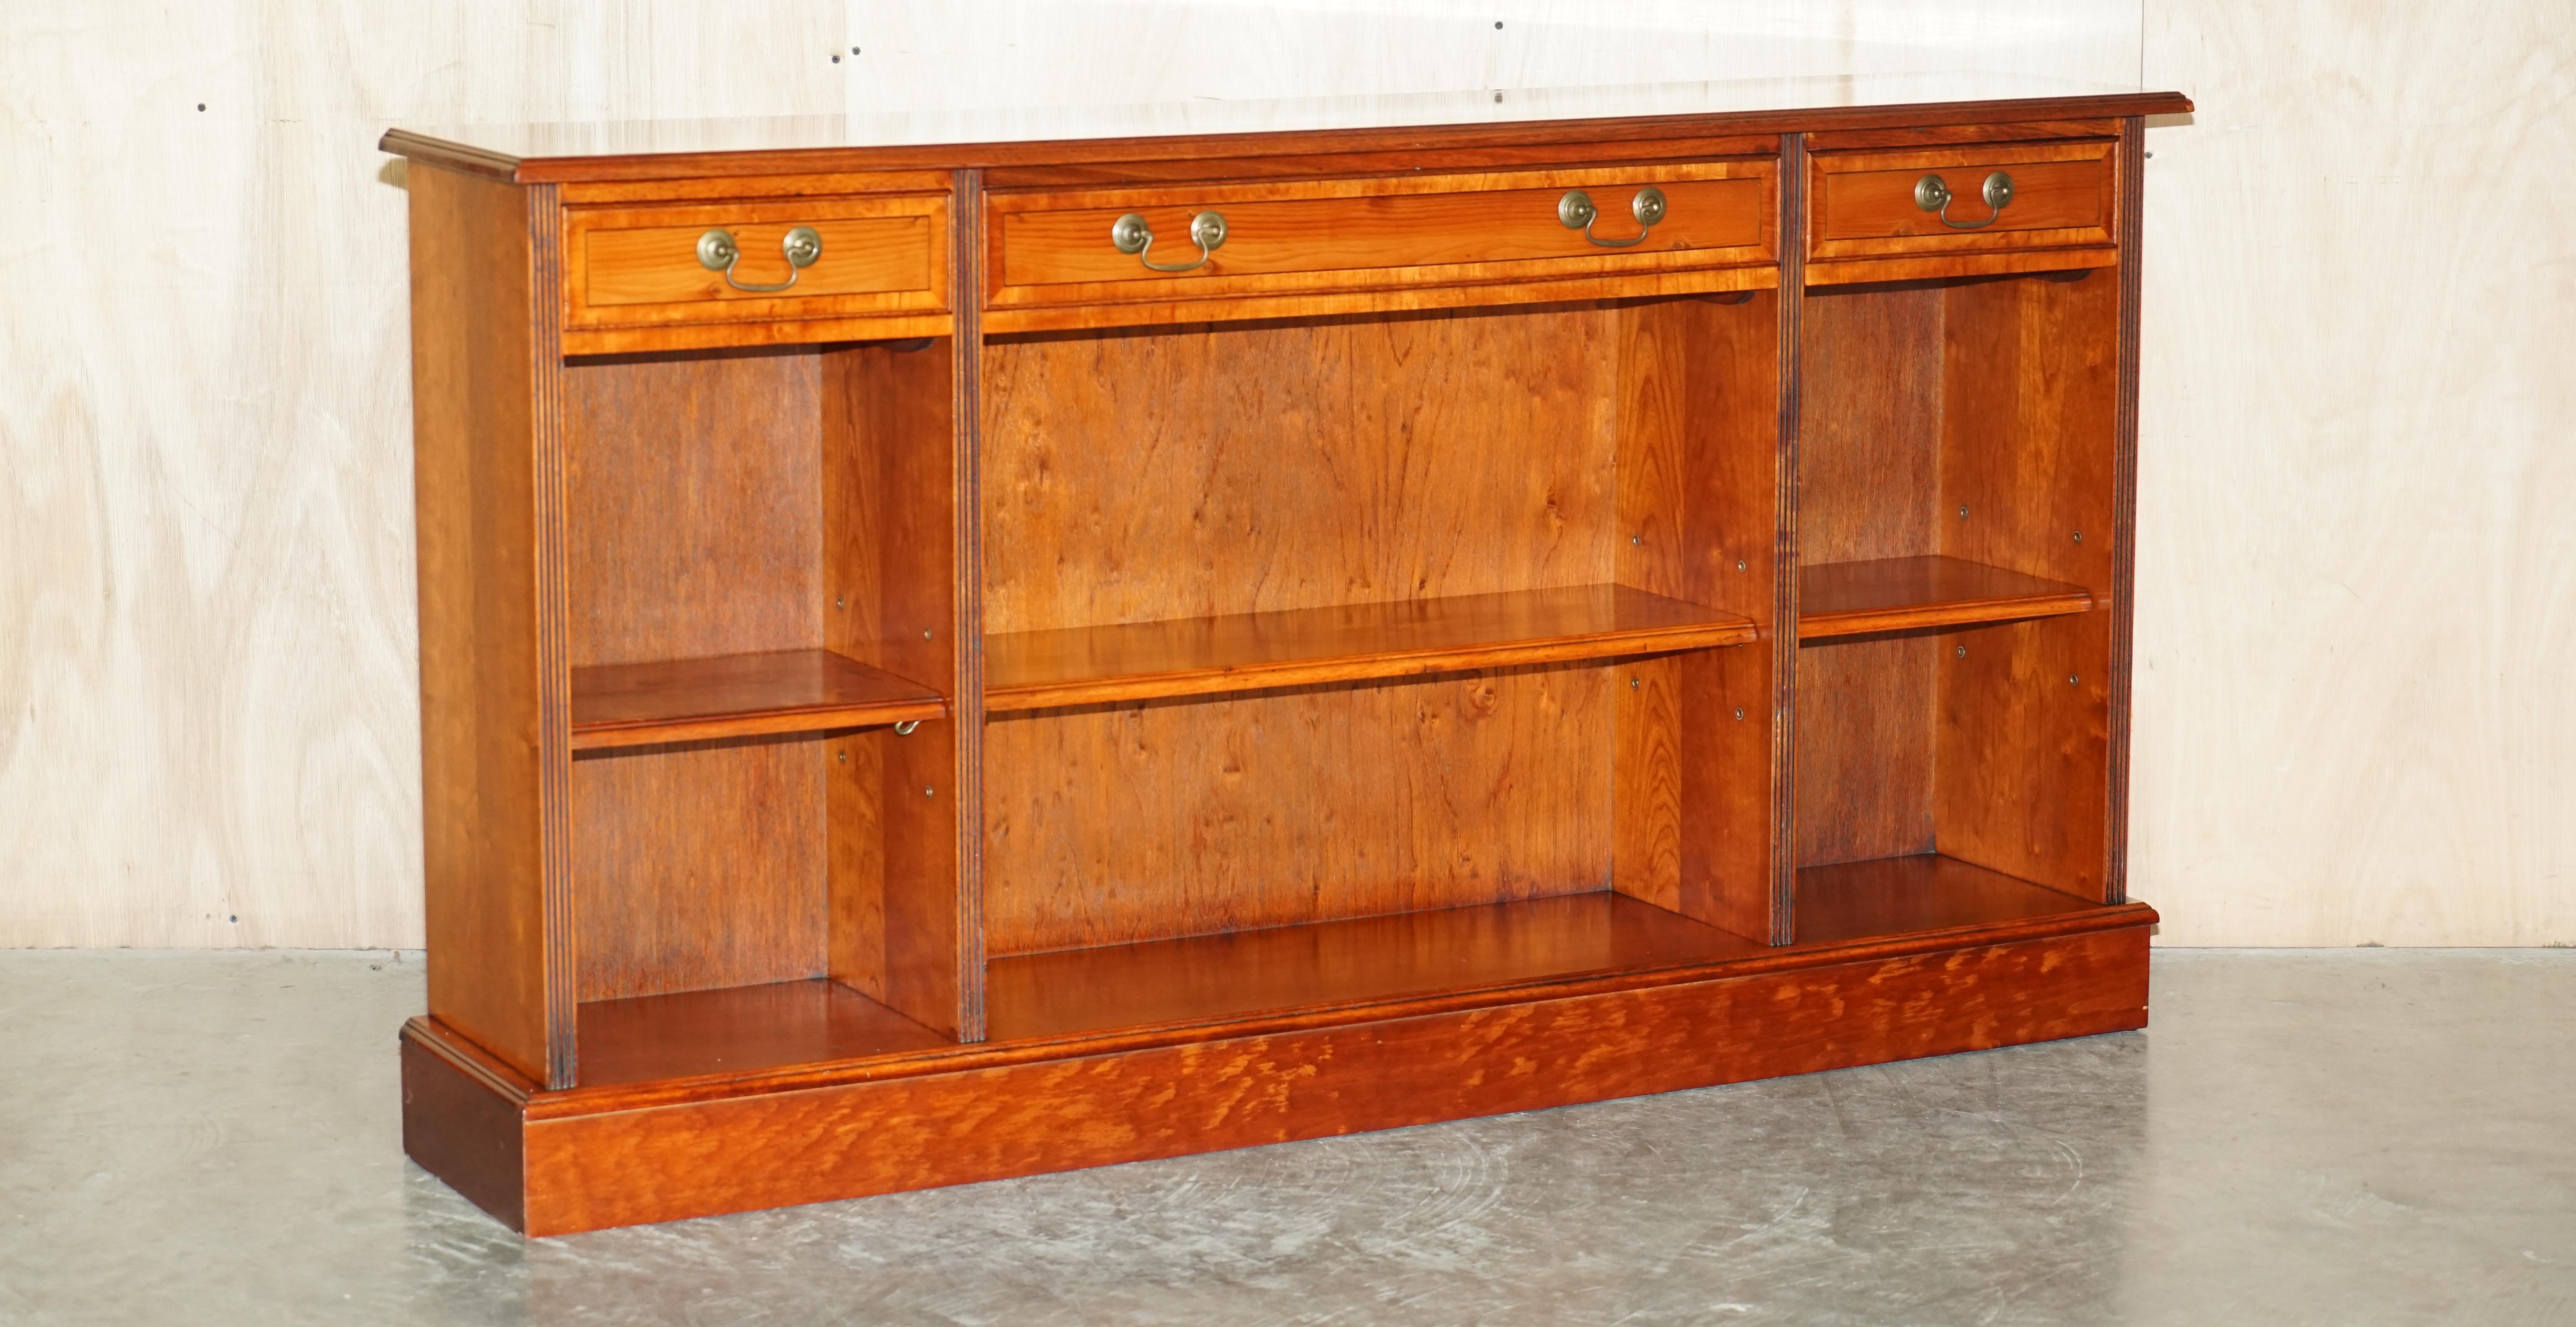 We are delighted to offer for sale this lovely vintage Burr Yew wood open library bookcase / sideboard with drawers 

A good looking and utilitarian piece of furniture, it looks good in any setting, the shelves are all height adjustable to fit